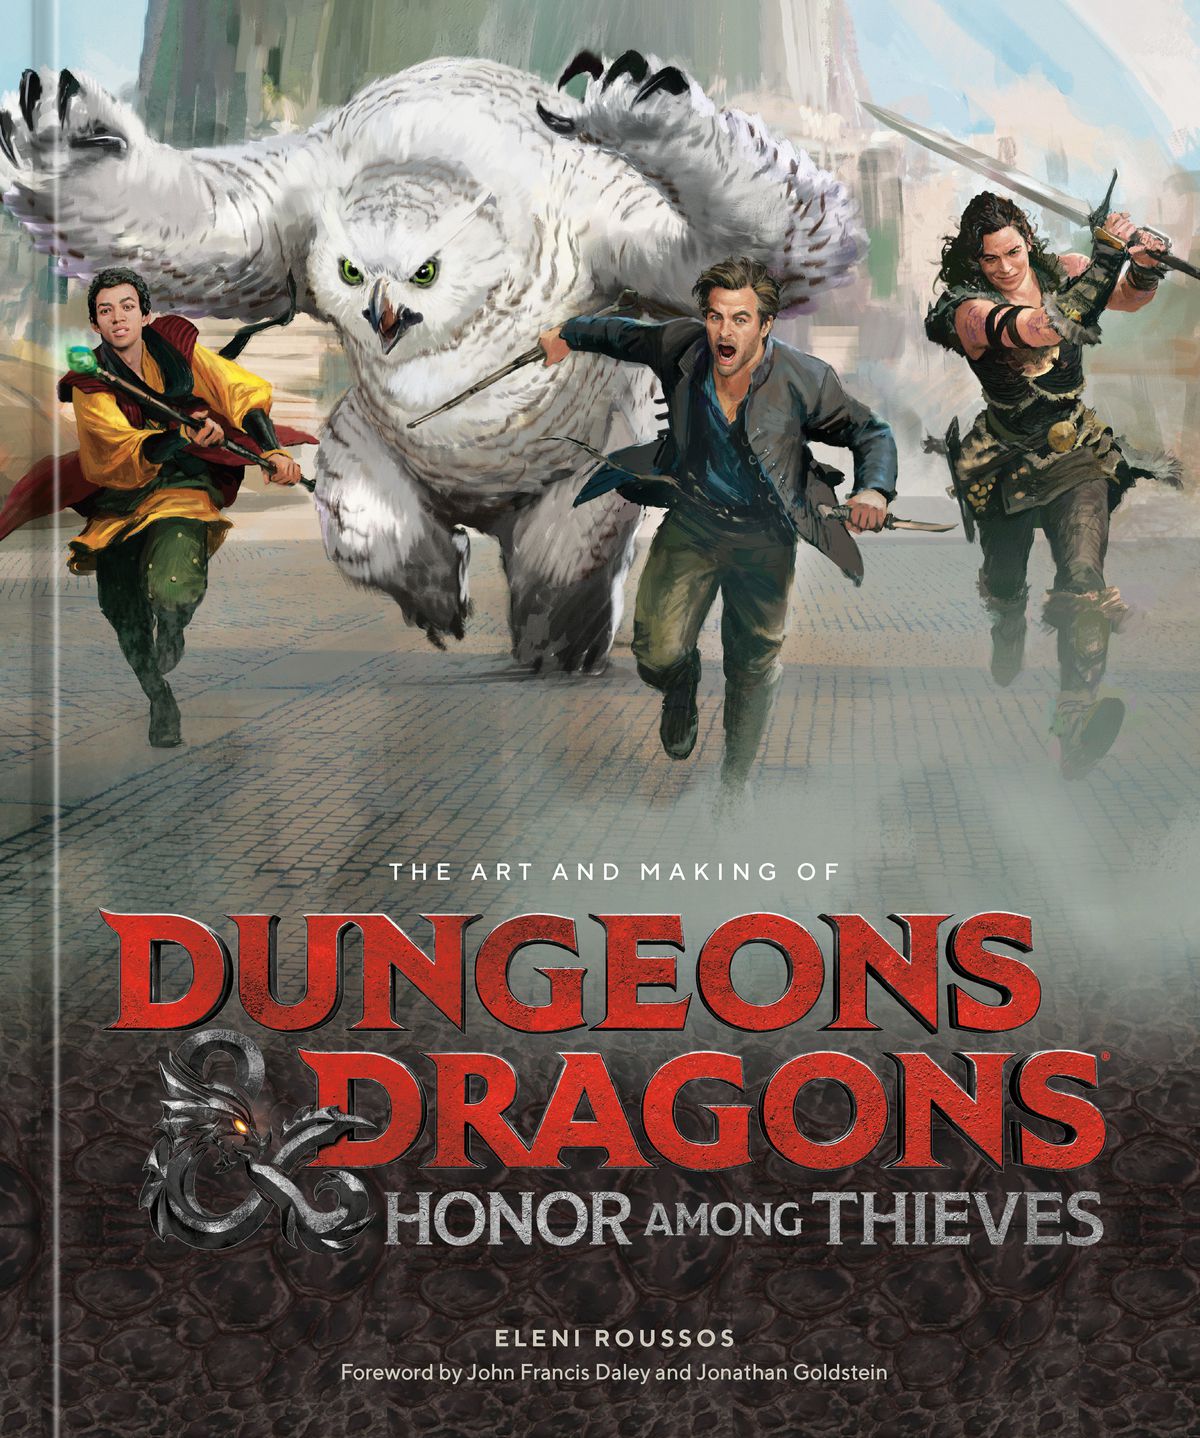 Cover art for The Art and Making of Dungeons and Dragons: Honor Among Thieves, featuring a painting the movie’s heroes charging forward.